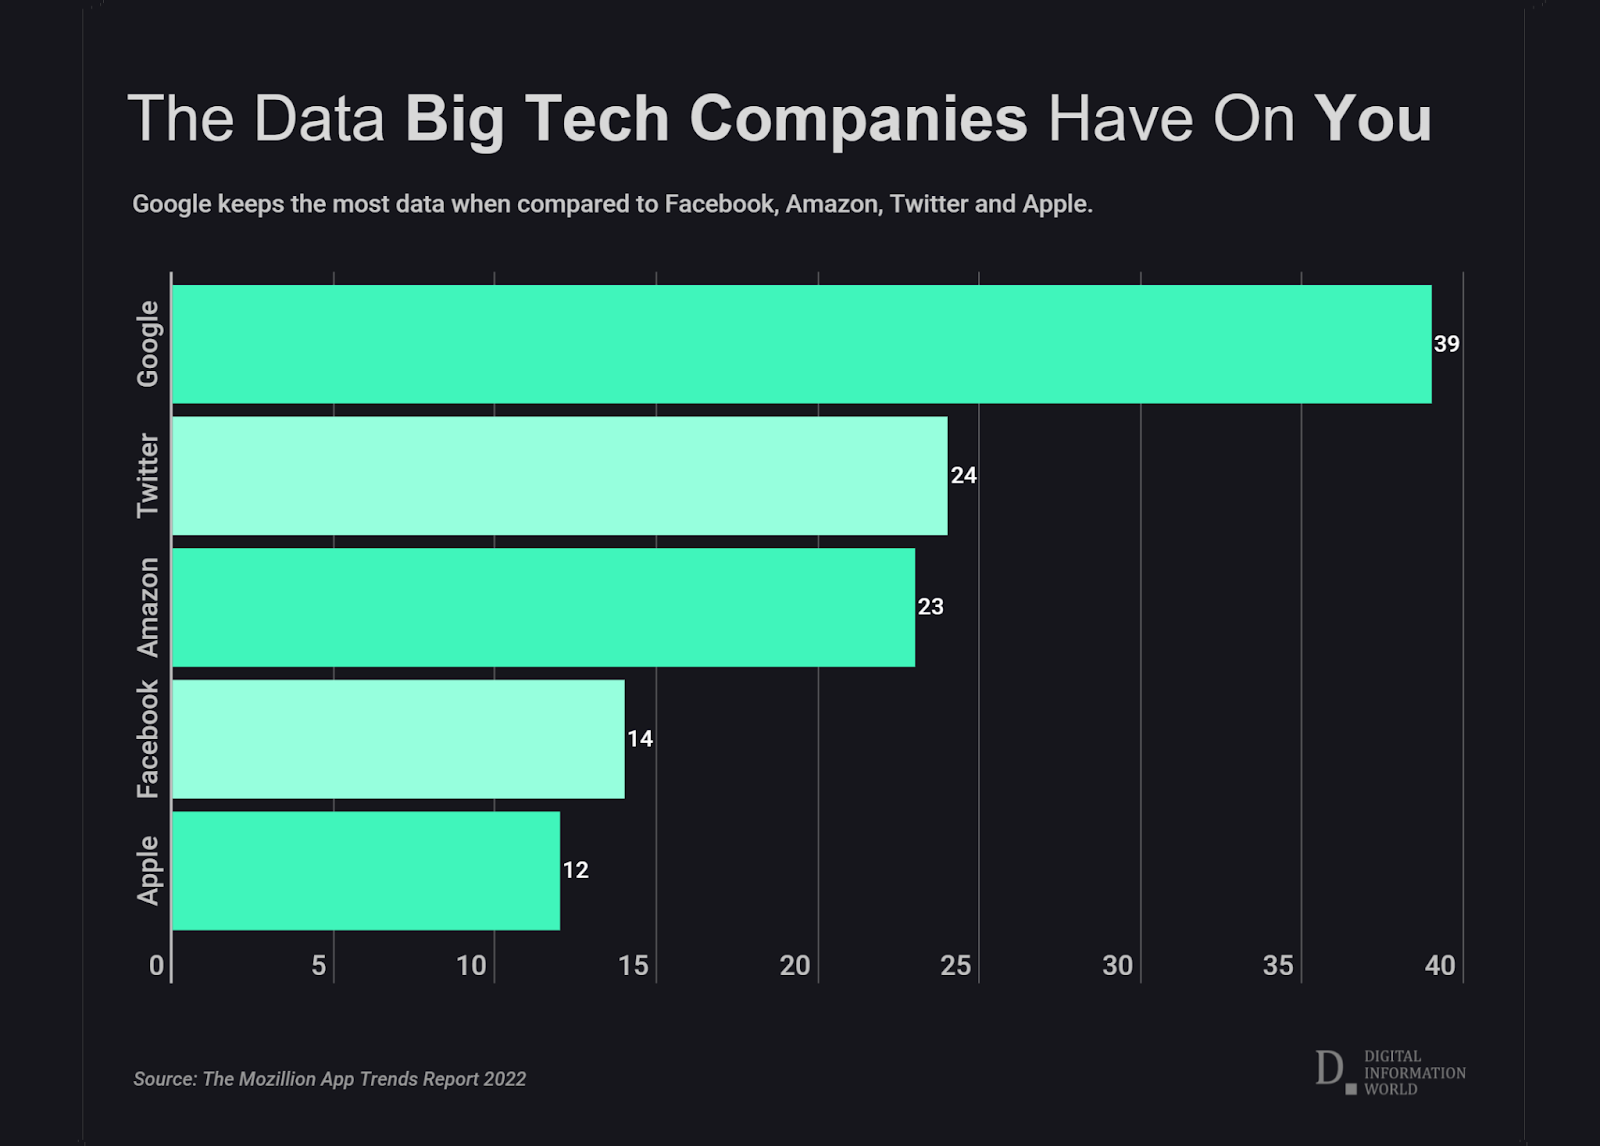 Bar char showing data tech companies have on you